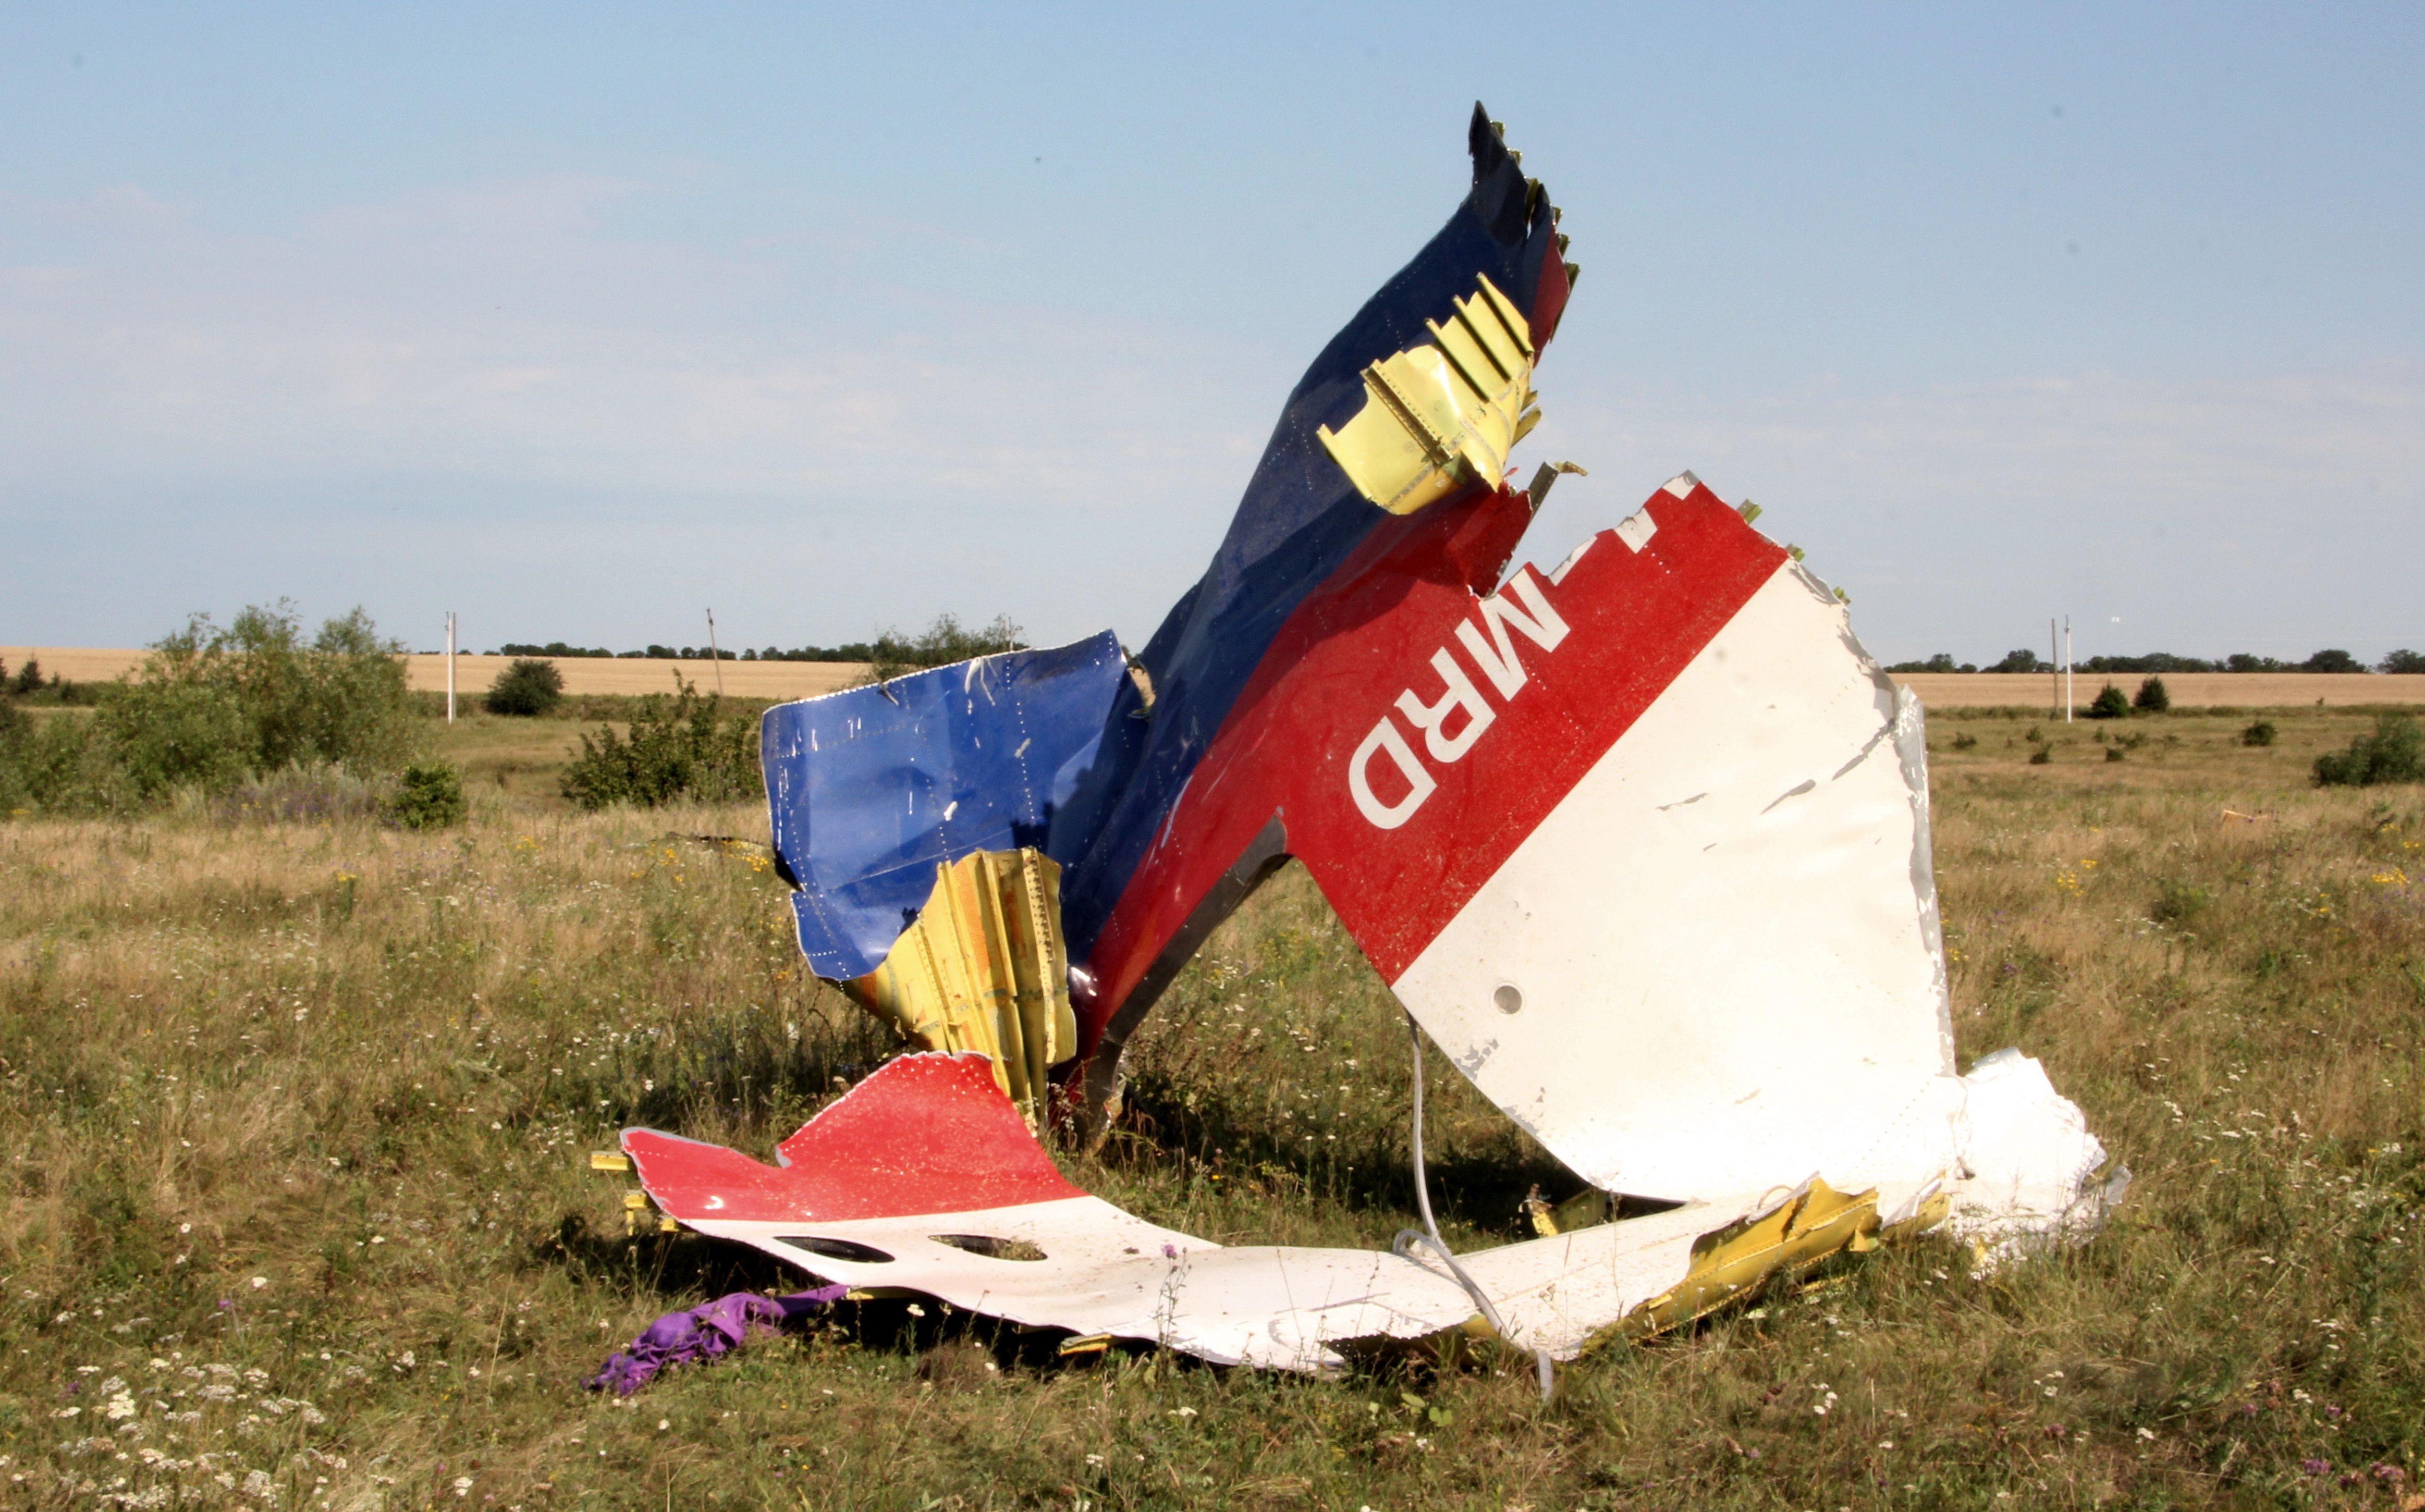 The wreckage of flight MH17